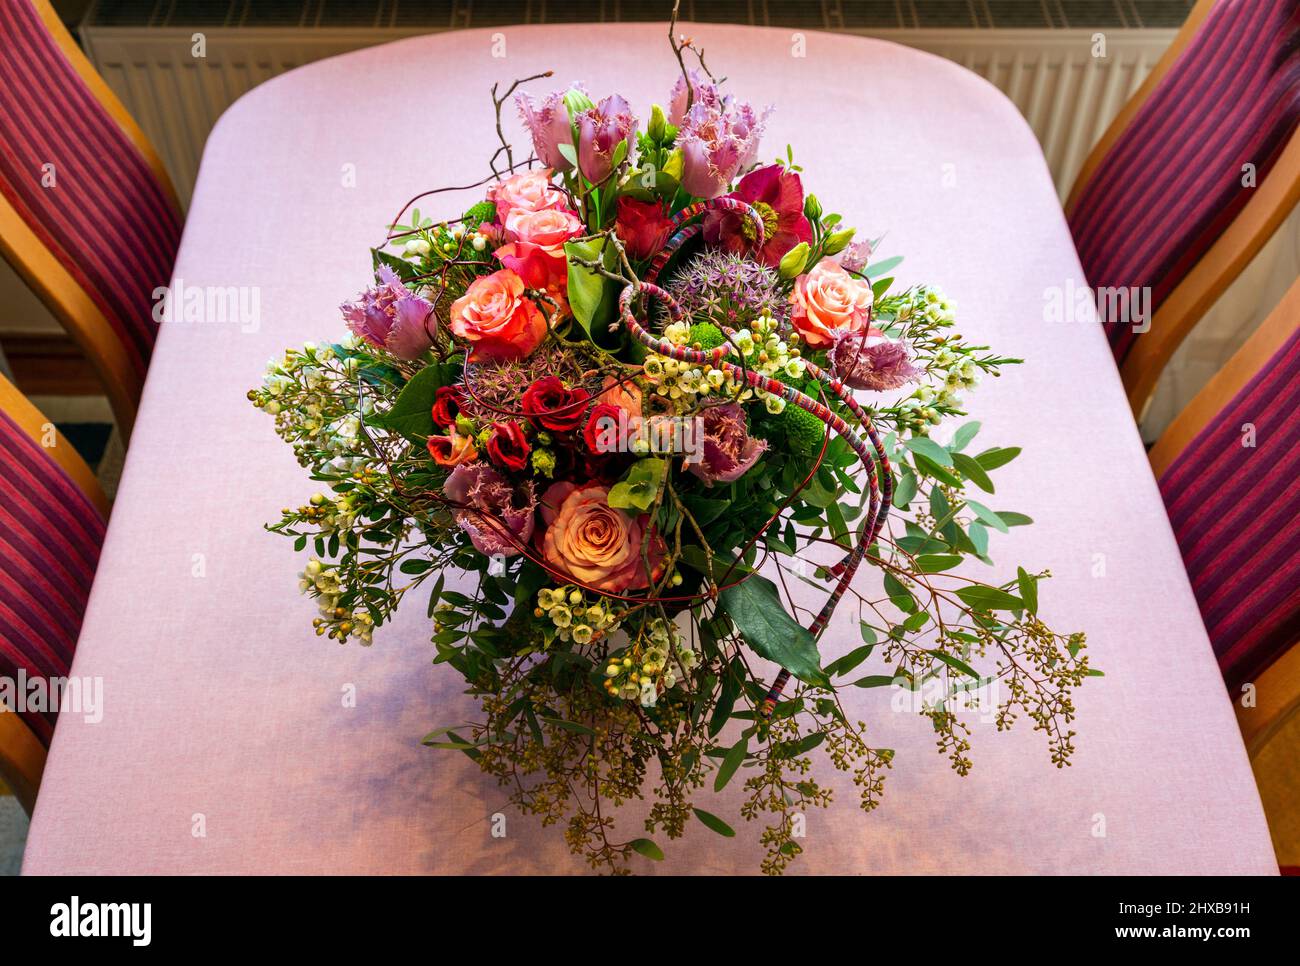 nature, plants, flowers, bunch of flowers on a table, birthday bouquet, roses Stock Photo